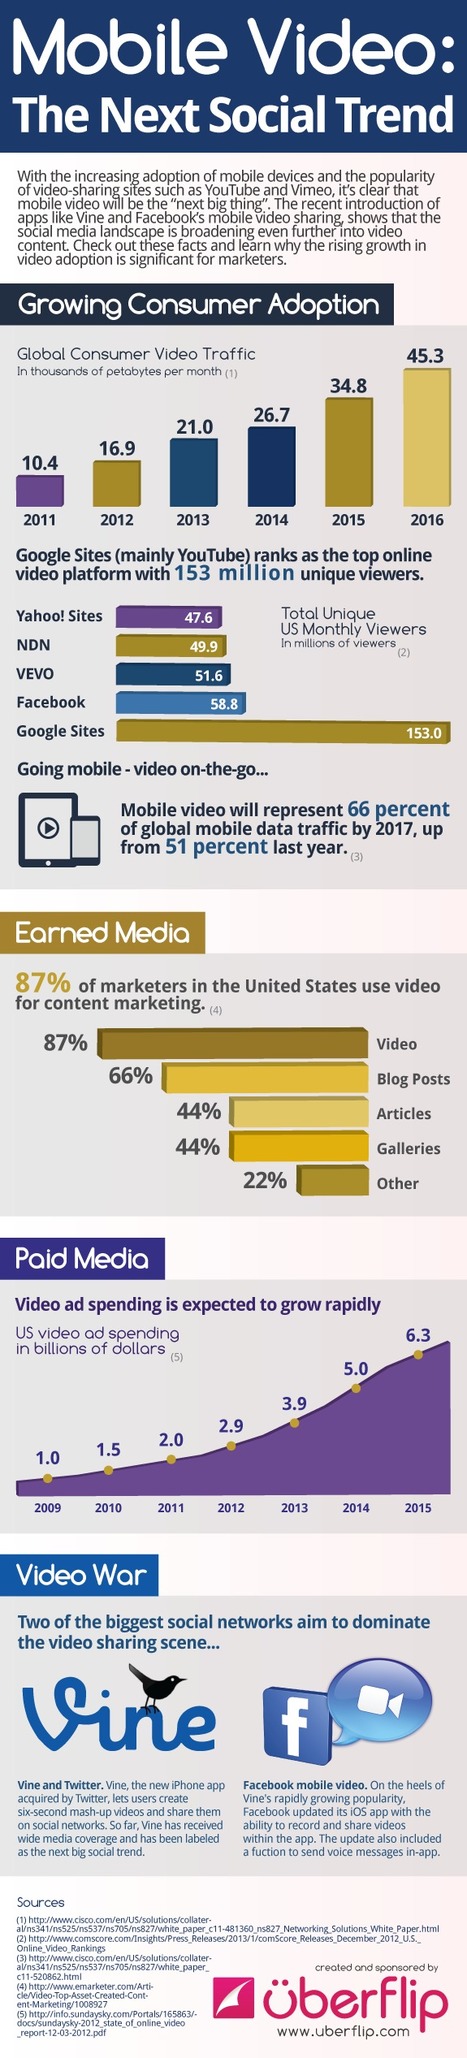 Is Mobile Video The Next Big Thing In Social Media? [INFOGRAPHIC] | Mobile Technology | Scoop.it